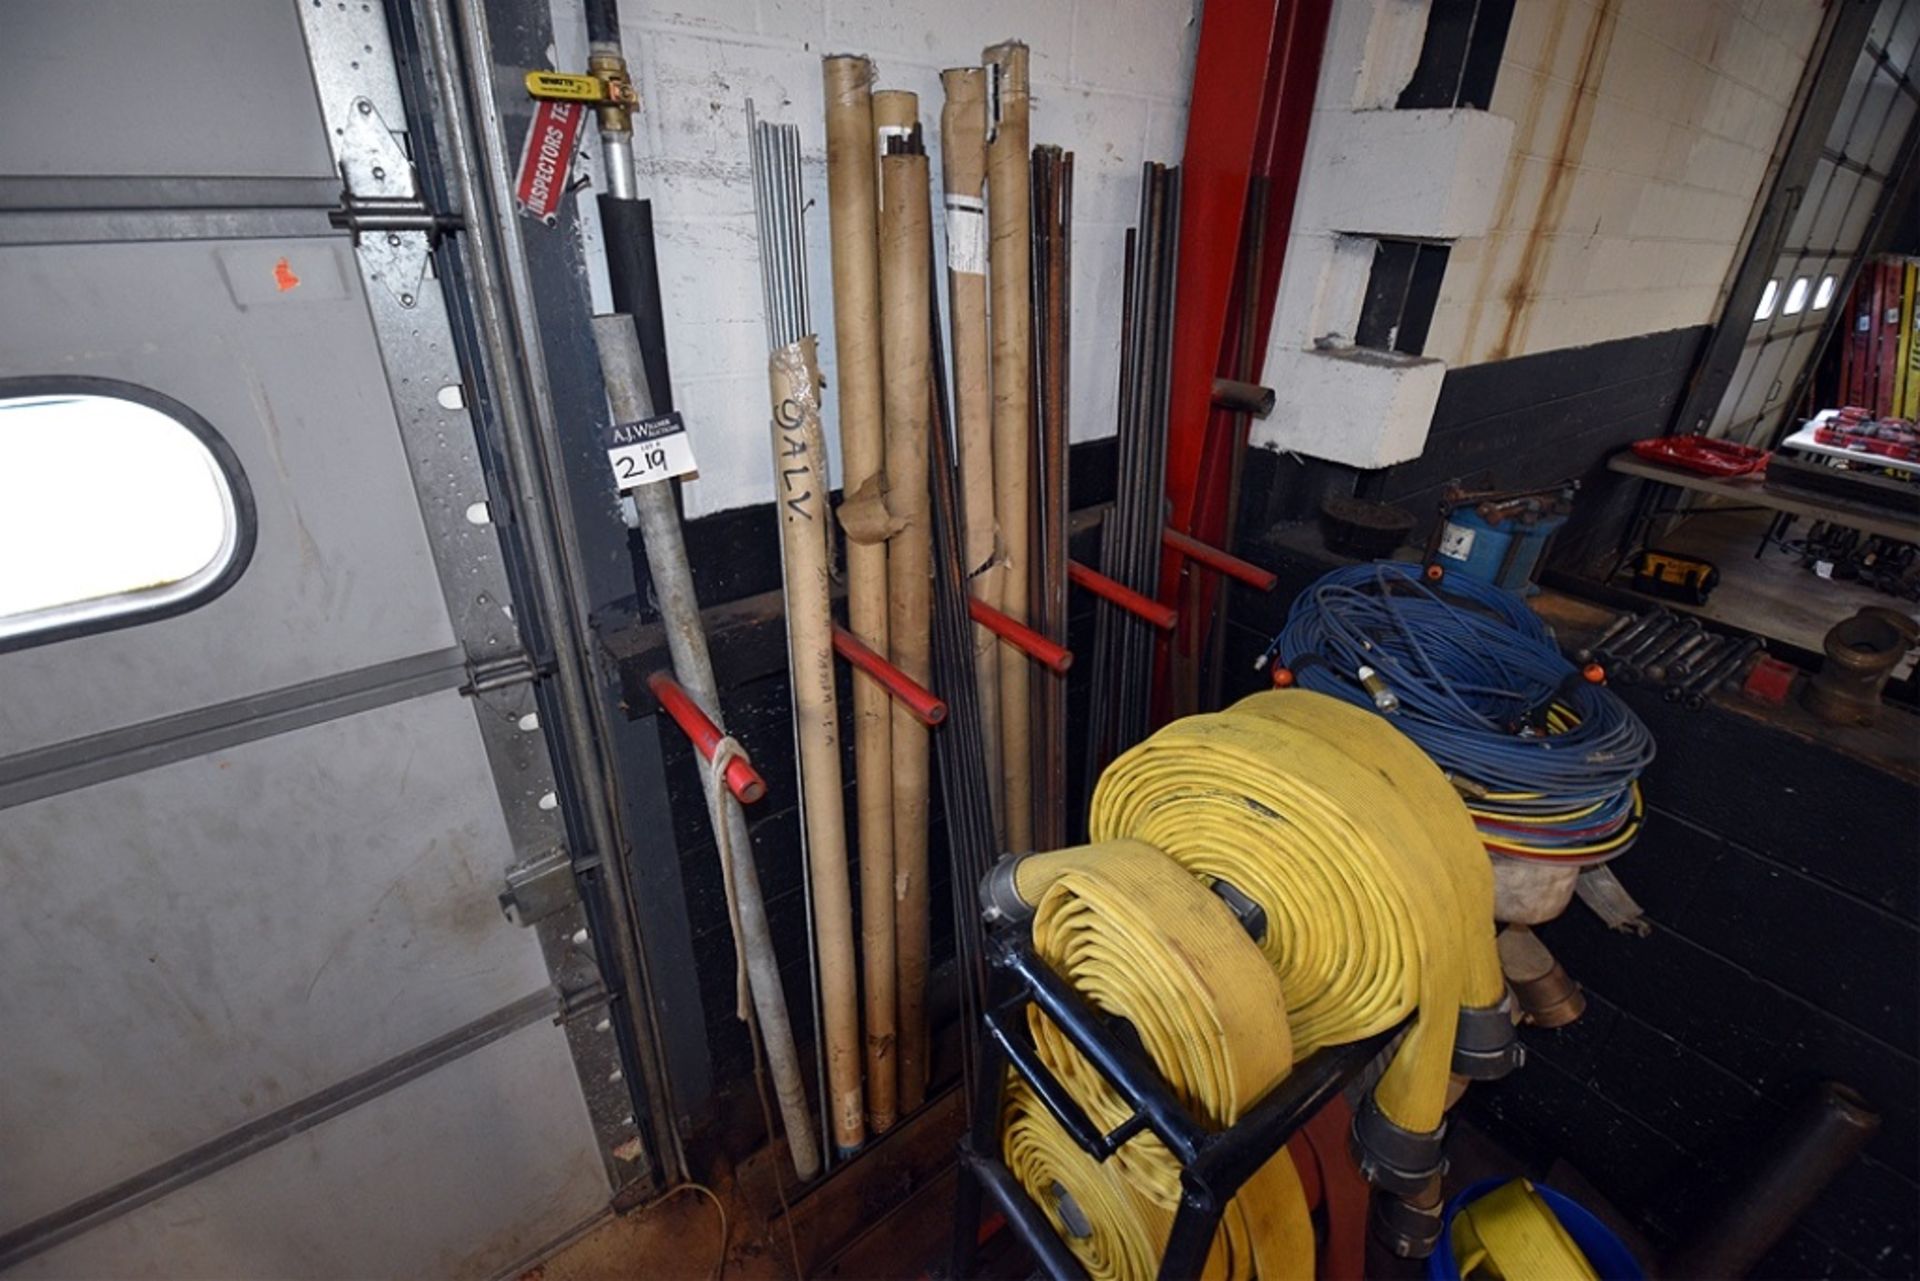 Contents On Cart, Work Table, and on 2 Shelving Units: Threaded Rods, 50' Fire Hoses, Ass't Pipe Fit - Image 11 of 15